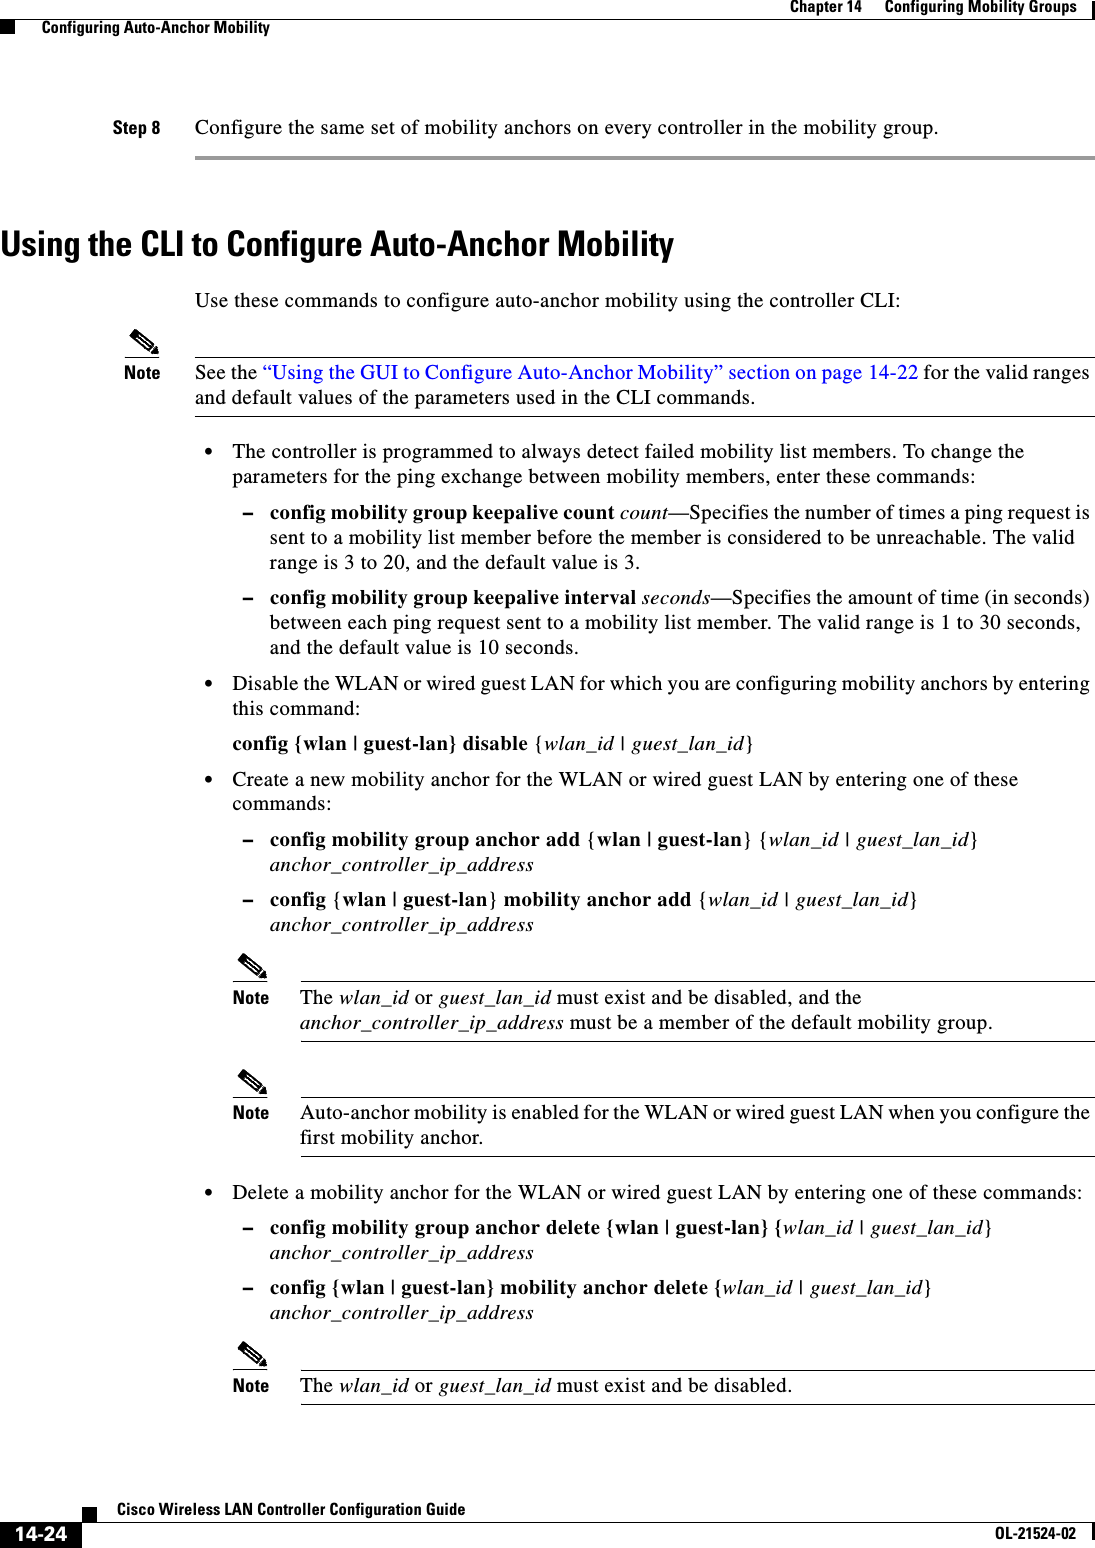  14-24Cisco Wireless LAN Controller Configuration GuideOL-21524-02Chapter 14      Configuring Mobility Groups  Configuring Auto-Anchor MobilityStep 8 Configure the same set of mobility anchors on every controller in the mobility group.Using the CLI to Configure Auto-Anchor MobilityUse these commands to configure auto-anchor mobility using the controller CLI:Note See the “Using the GUI to Configure Auto-Anchor Mobility” section on page 14-22 for the valid ranges and default values of the parameters used in the CLI commands.  • The controller is programmed to always detect failed mobility list members. To change the parameters for the ping exchange between mobility members, enter these commands:  –config mobility group keepalive count count—Specifies the number of times a ping request is sent to a mobility list member before the member is considered to be unreachable. The valid range is 3 to 20, and the default value is 3.  –config mobility group keepalive interval seconds—Specifies the amount of time (in seconds) between each ping request sent to a mobility list member. The valid range is 1 to 30 seconds, and the default value is 10 seconds.  • Disable the WLAN or wired guest LAN for which you are configuring mobility anchors by entering this command:config {wlan | guest-lan} disable {wlan_id | guest_lan_id}   • Create a new mobility anchor for the WLAN or wired guest LAN by entering one of these commands:  –config mobility group anchor add {wlan | guest-lan} {wlan_id | guest_lan_id} anchor_controller_ip_address  –config {wlan | guest-lan} mobility anchor add {wlan_id | guest_lan_id} anchor_controller_ip_addressNote The wlan_id or guest_lan_id must exist and be disabled, and the anchor_controller_ip_address must be a member of the default mobility group.Note Auto-anchor mobility is enabled for the WLAN or wired guest LAN when you configure the first mobility anchor.  • Delete a mobility anchor for the WLAN or wired guest LAN by entering one of these commands:  –config mobility group anchor delete {wlan | guest-lan} {wlan_id | guest_lan_id} anchor_controller_ip_address  –config {wlan | guest-lan} mobility anchor delete {wlan_id | guest_lan_id} anchor_controller_ip_addressNote The wlan_id or guest_lan_id must exist and be disabled.